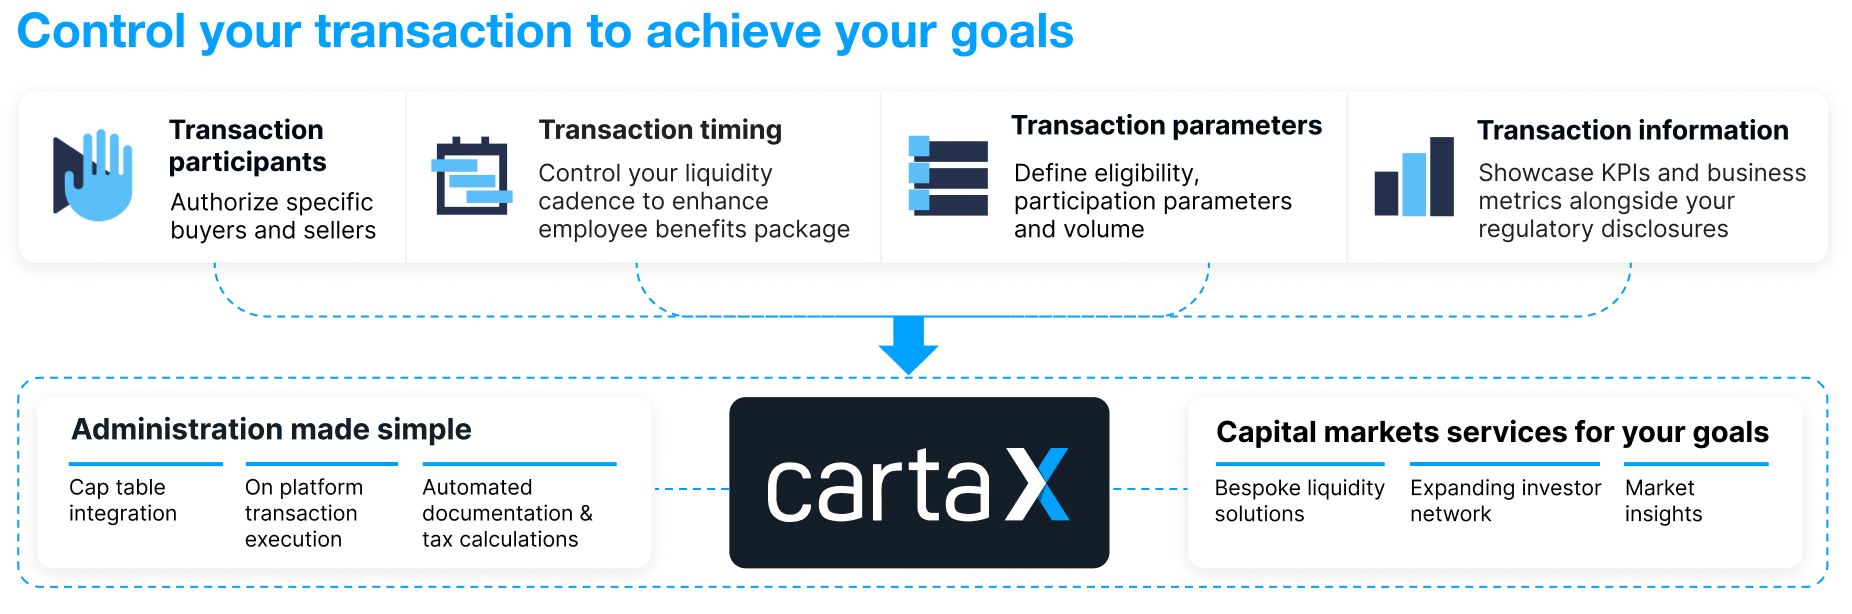 Control your transaction to achieve your goals chart